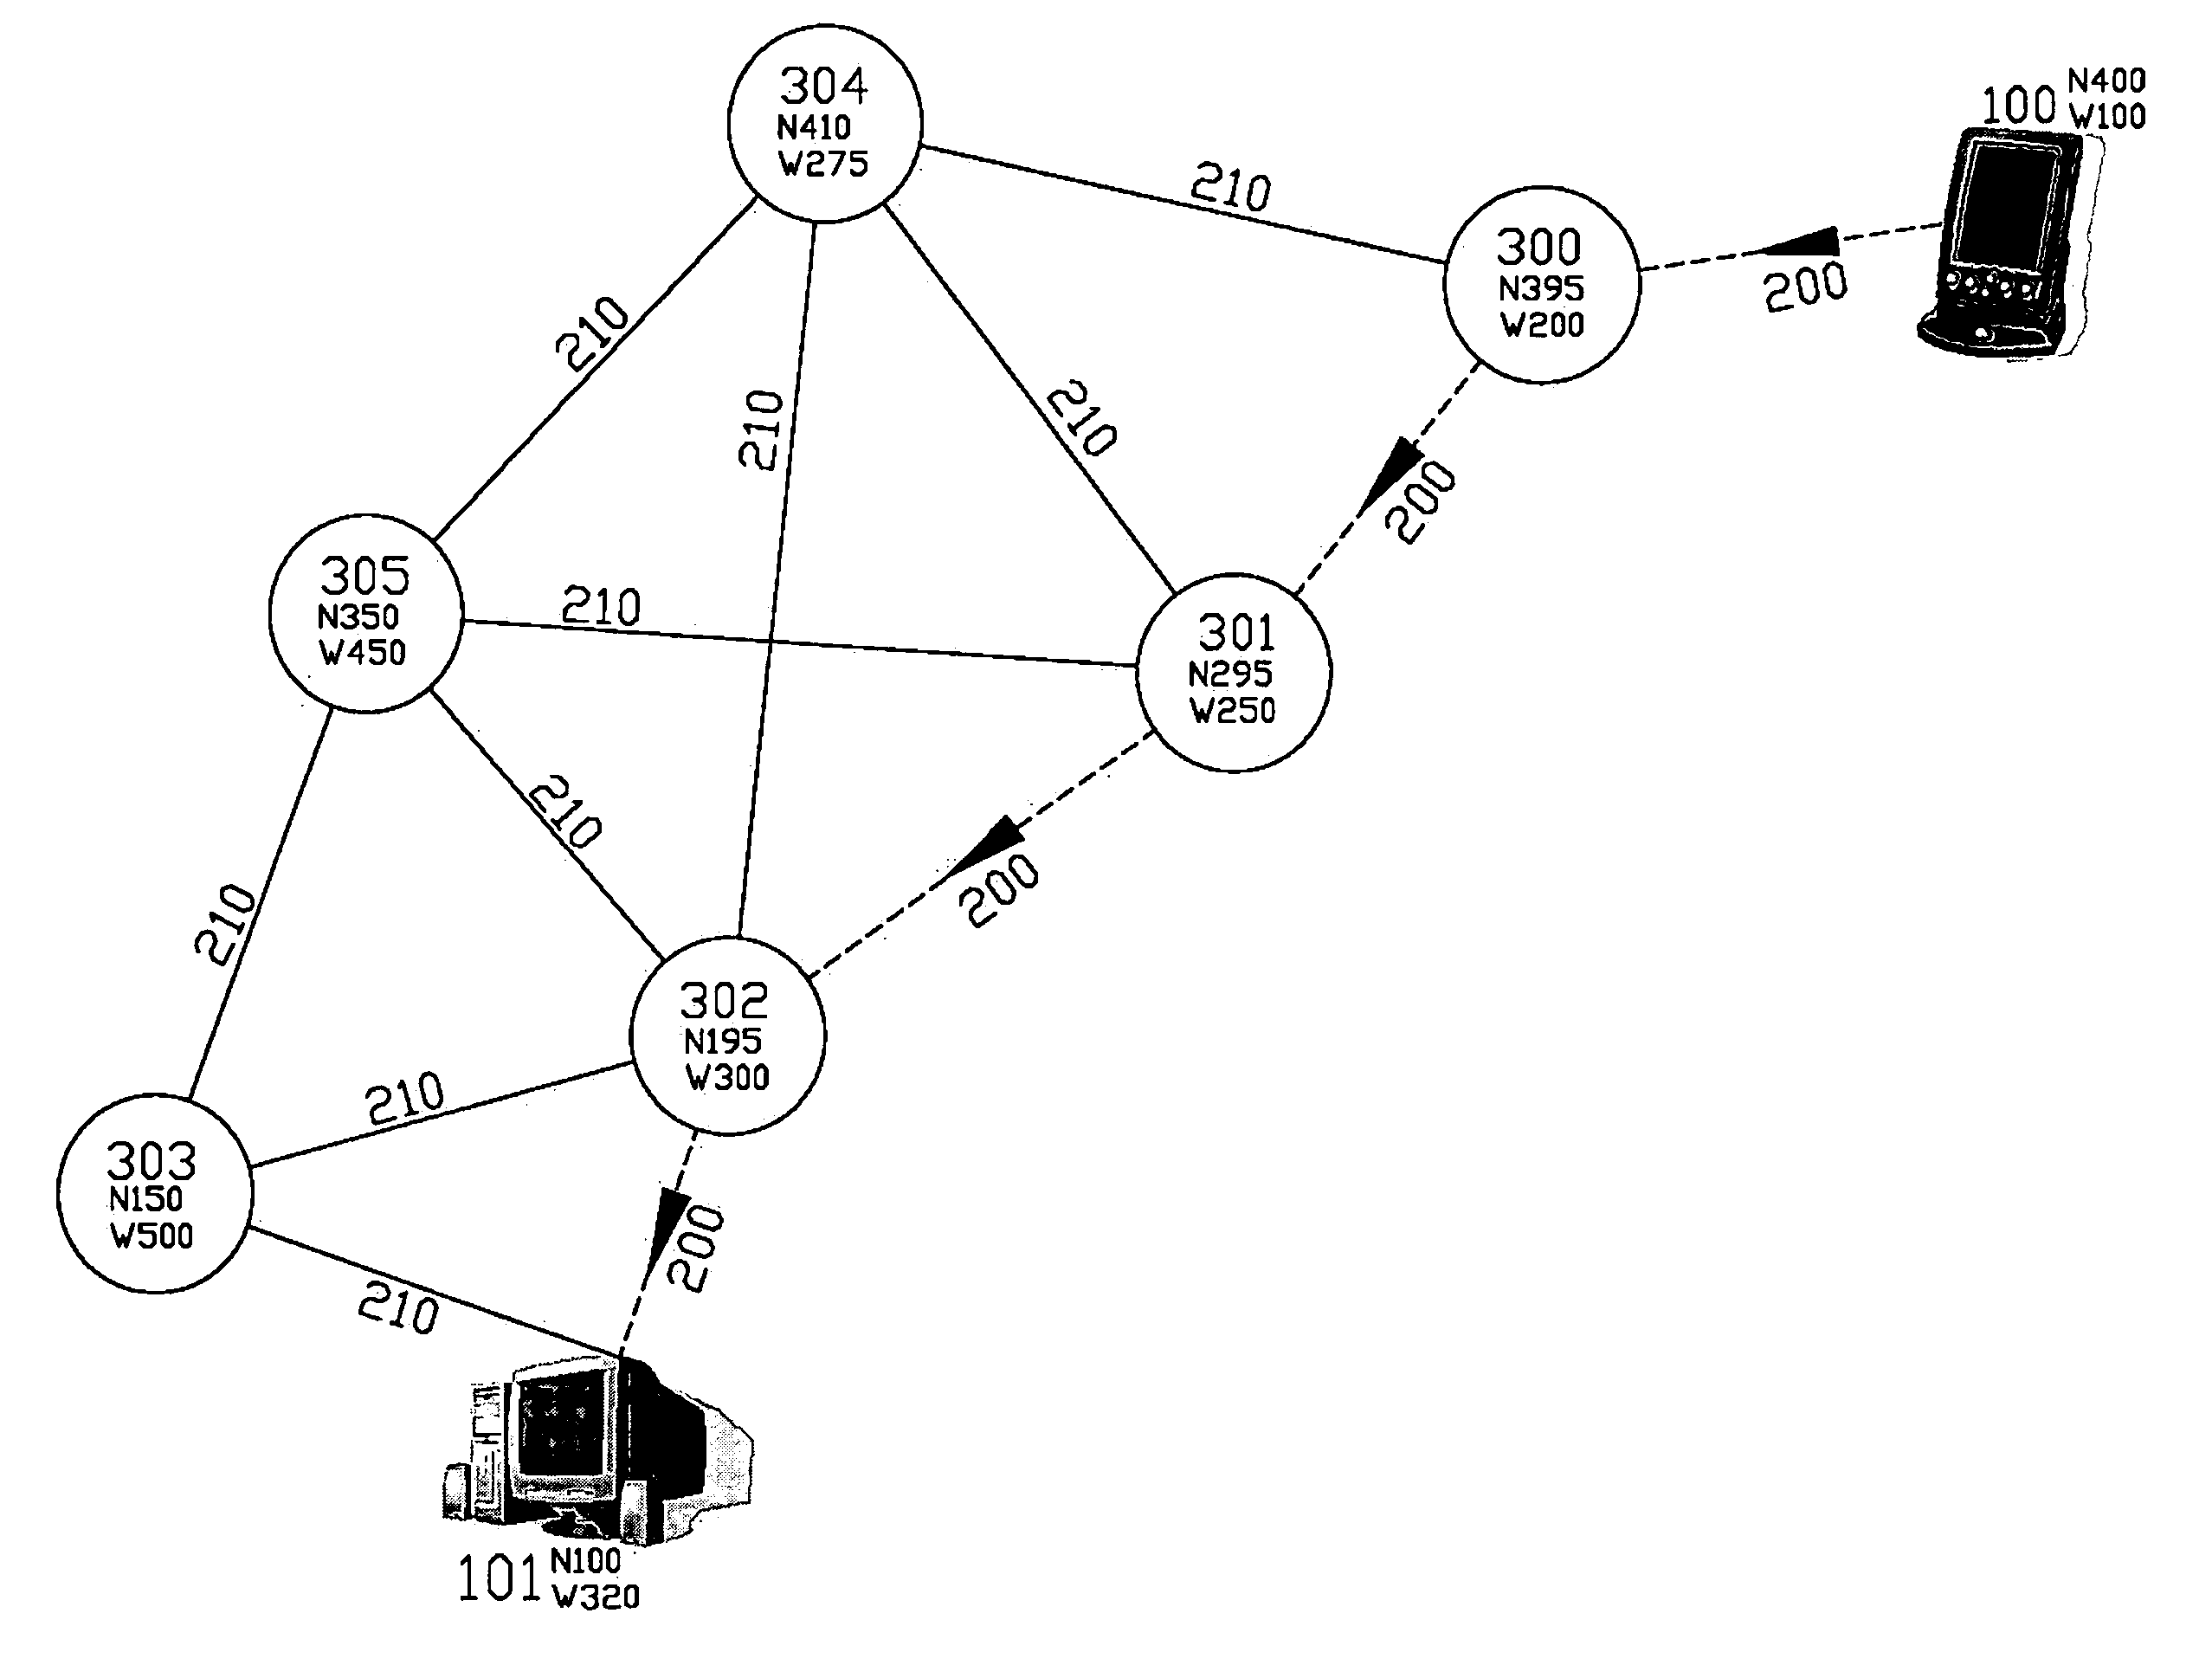 Method for routing data packets using an IP address based on geo position